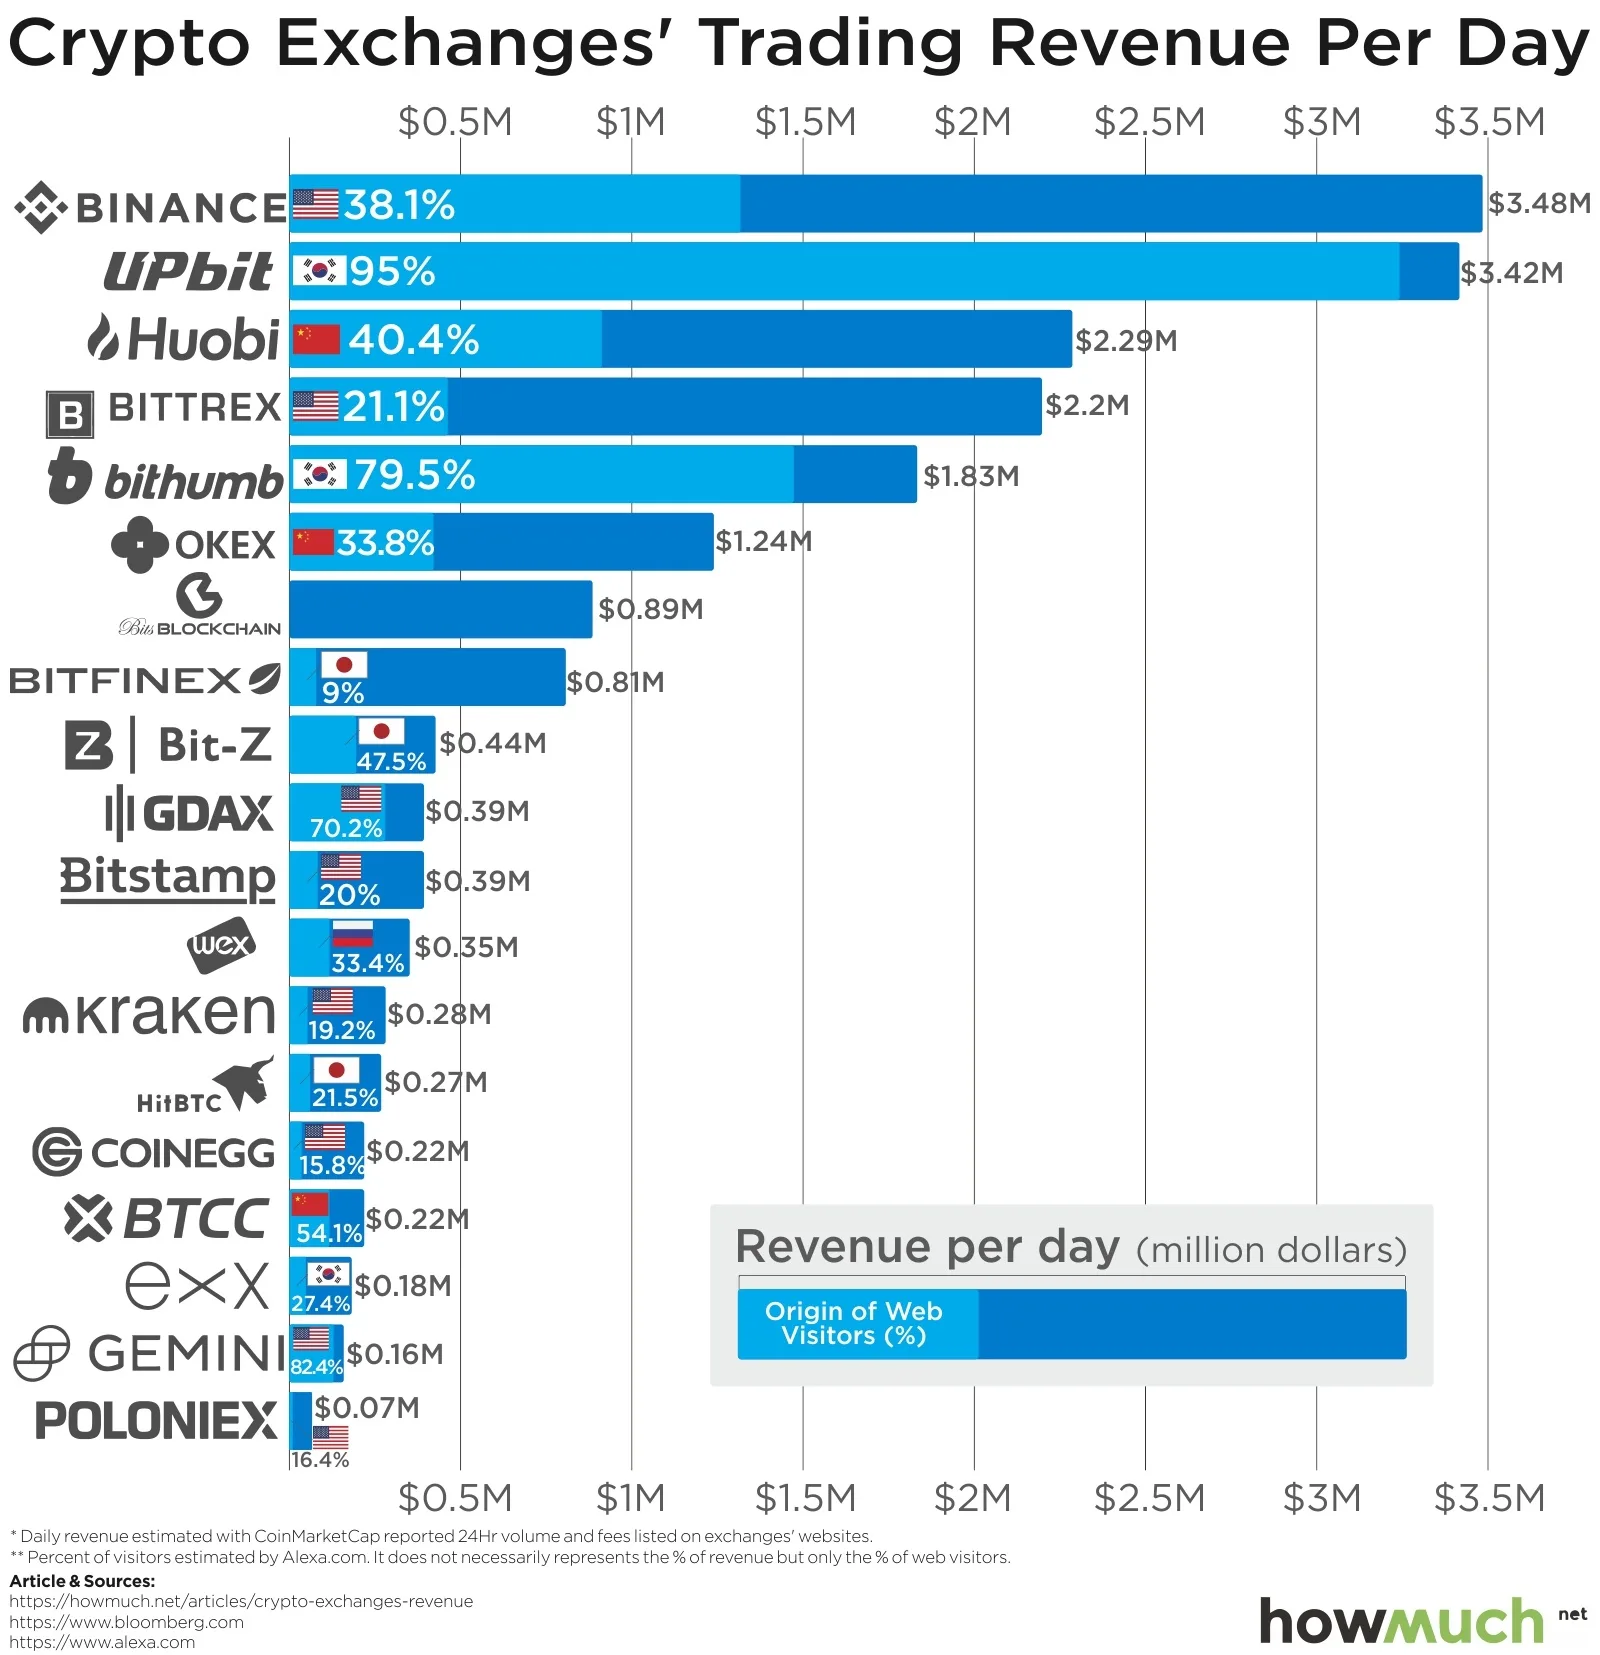 Crypto Exchanges Trading Revenue Per Day